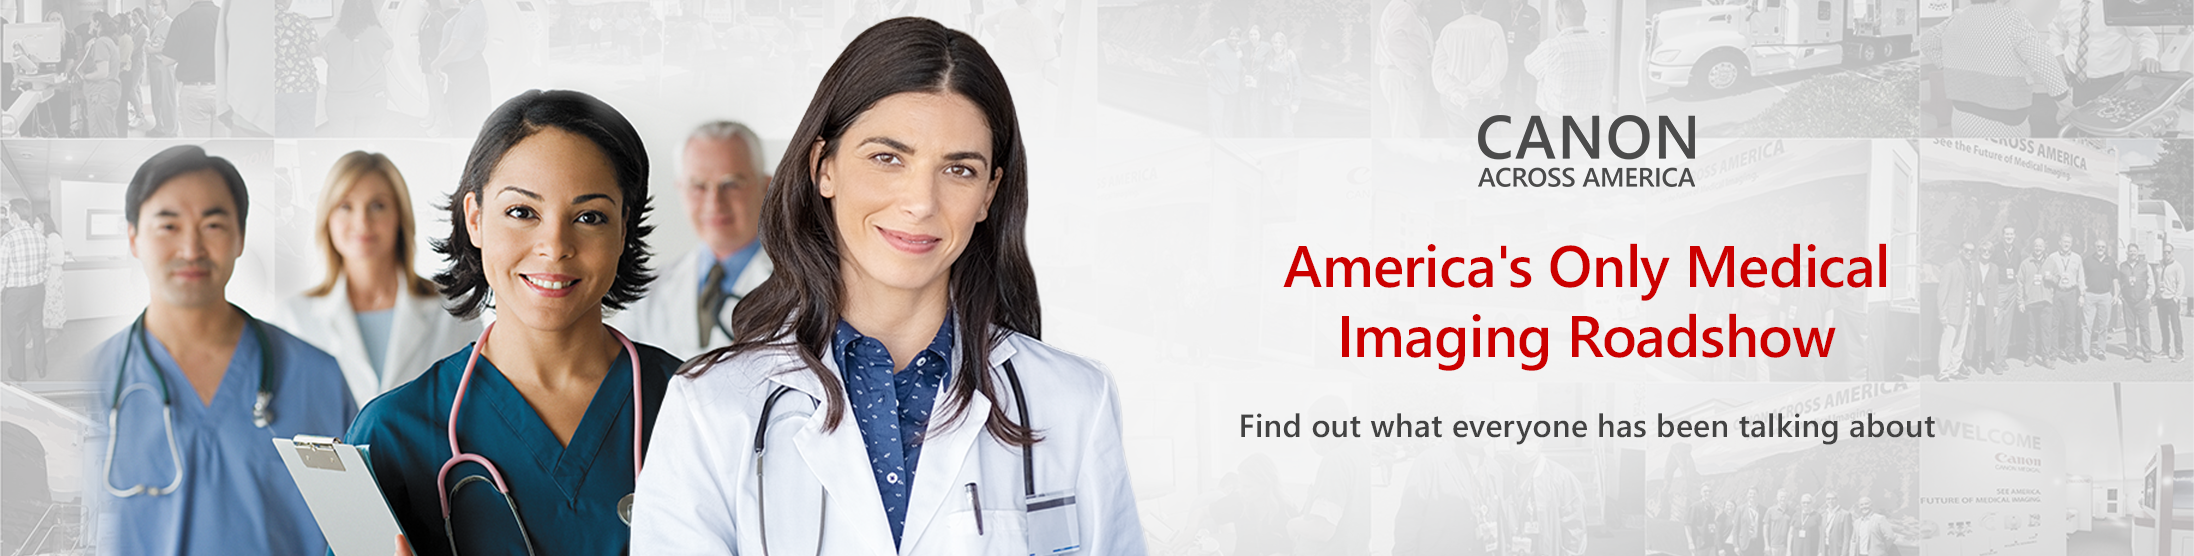 Canon Across America: America's Only Medical Imaging Roadshow. Find out what everyone has been talking about.